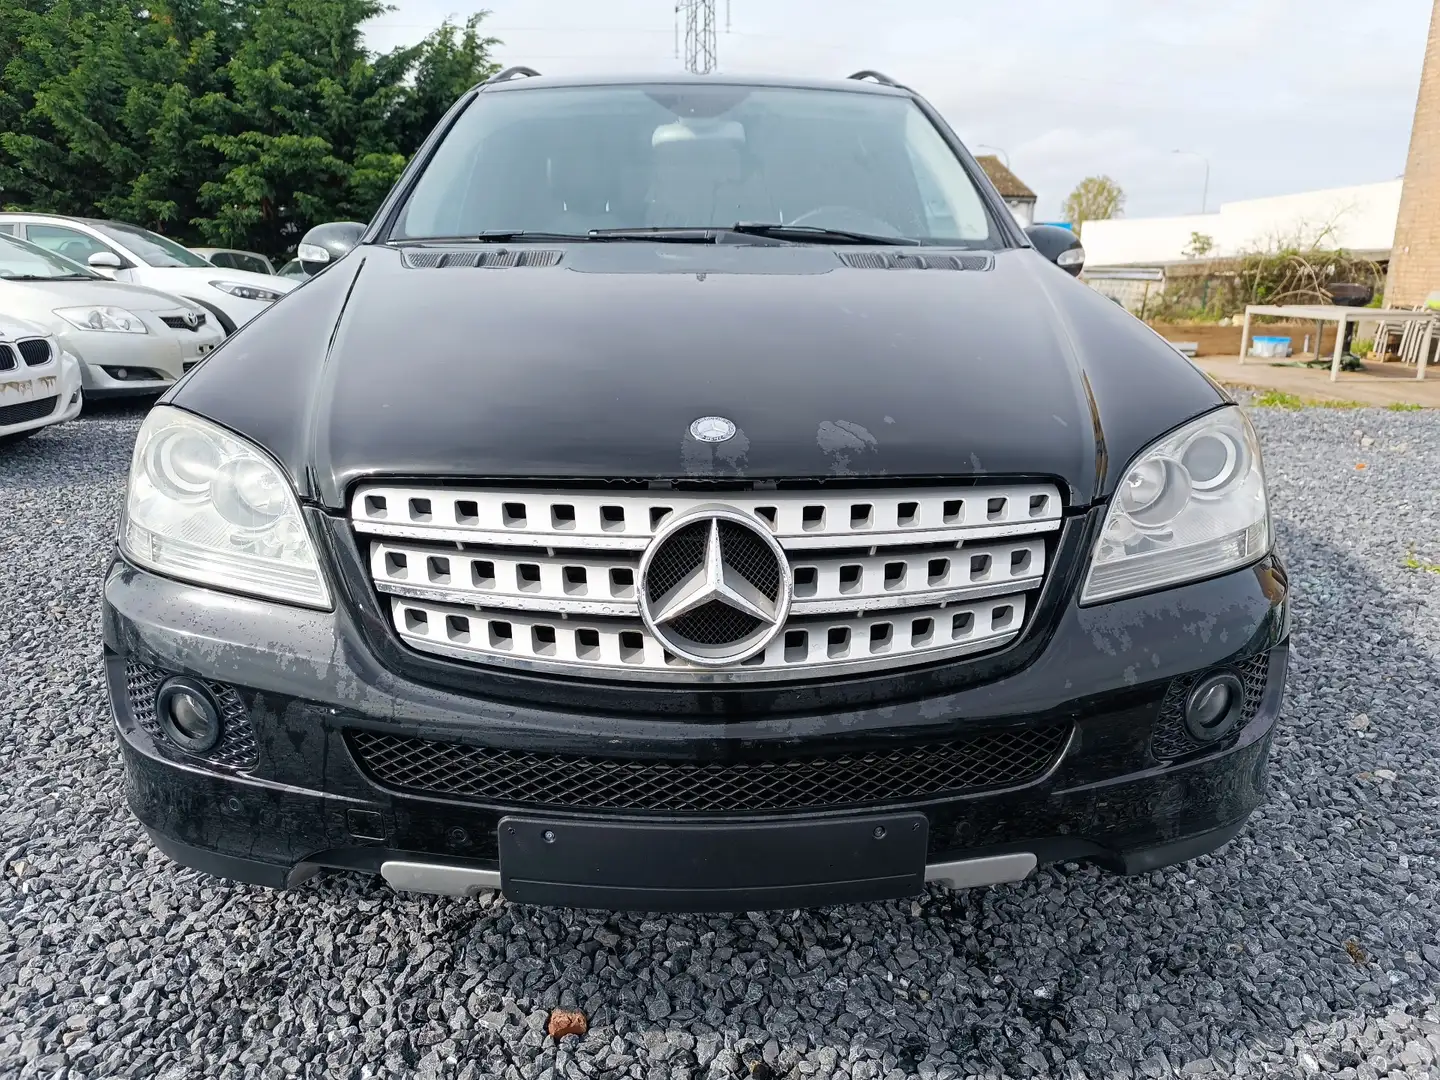 Mercedes-Benz ML 280 CDI / UTILITAIRE / Marchand ou Export Siyah - 2